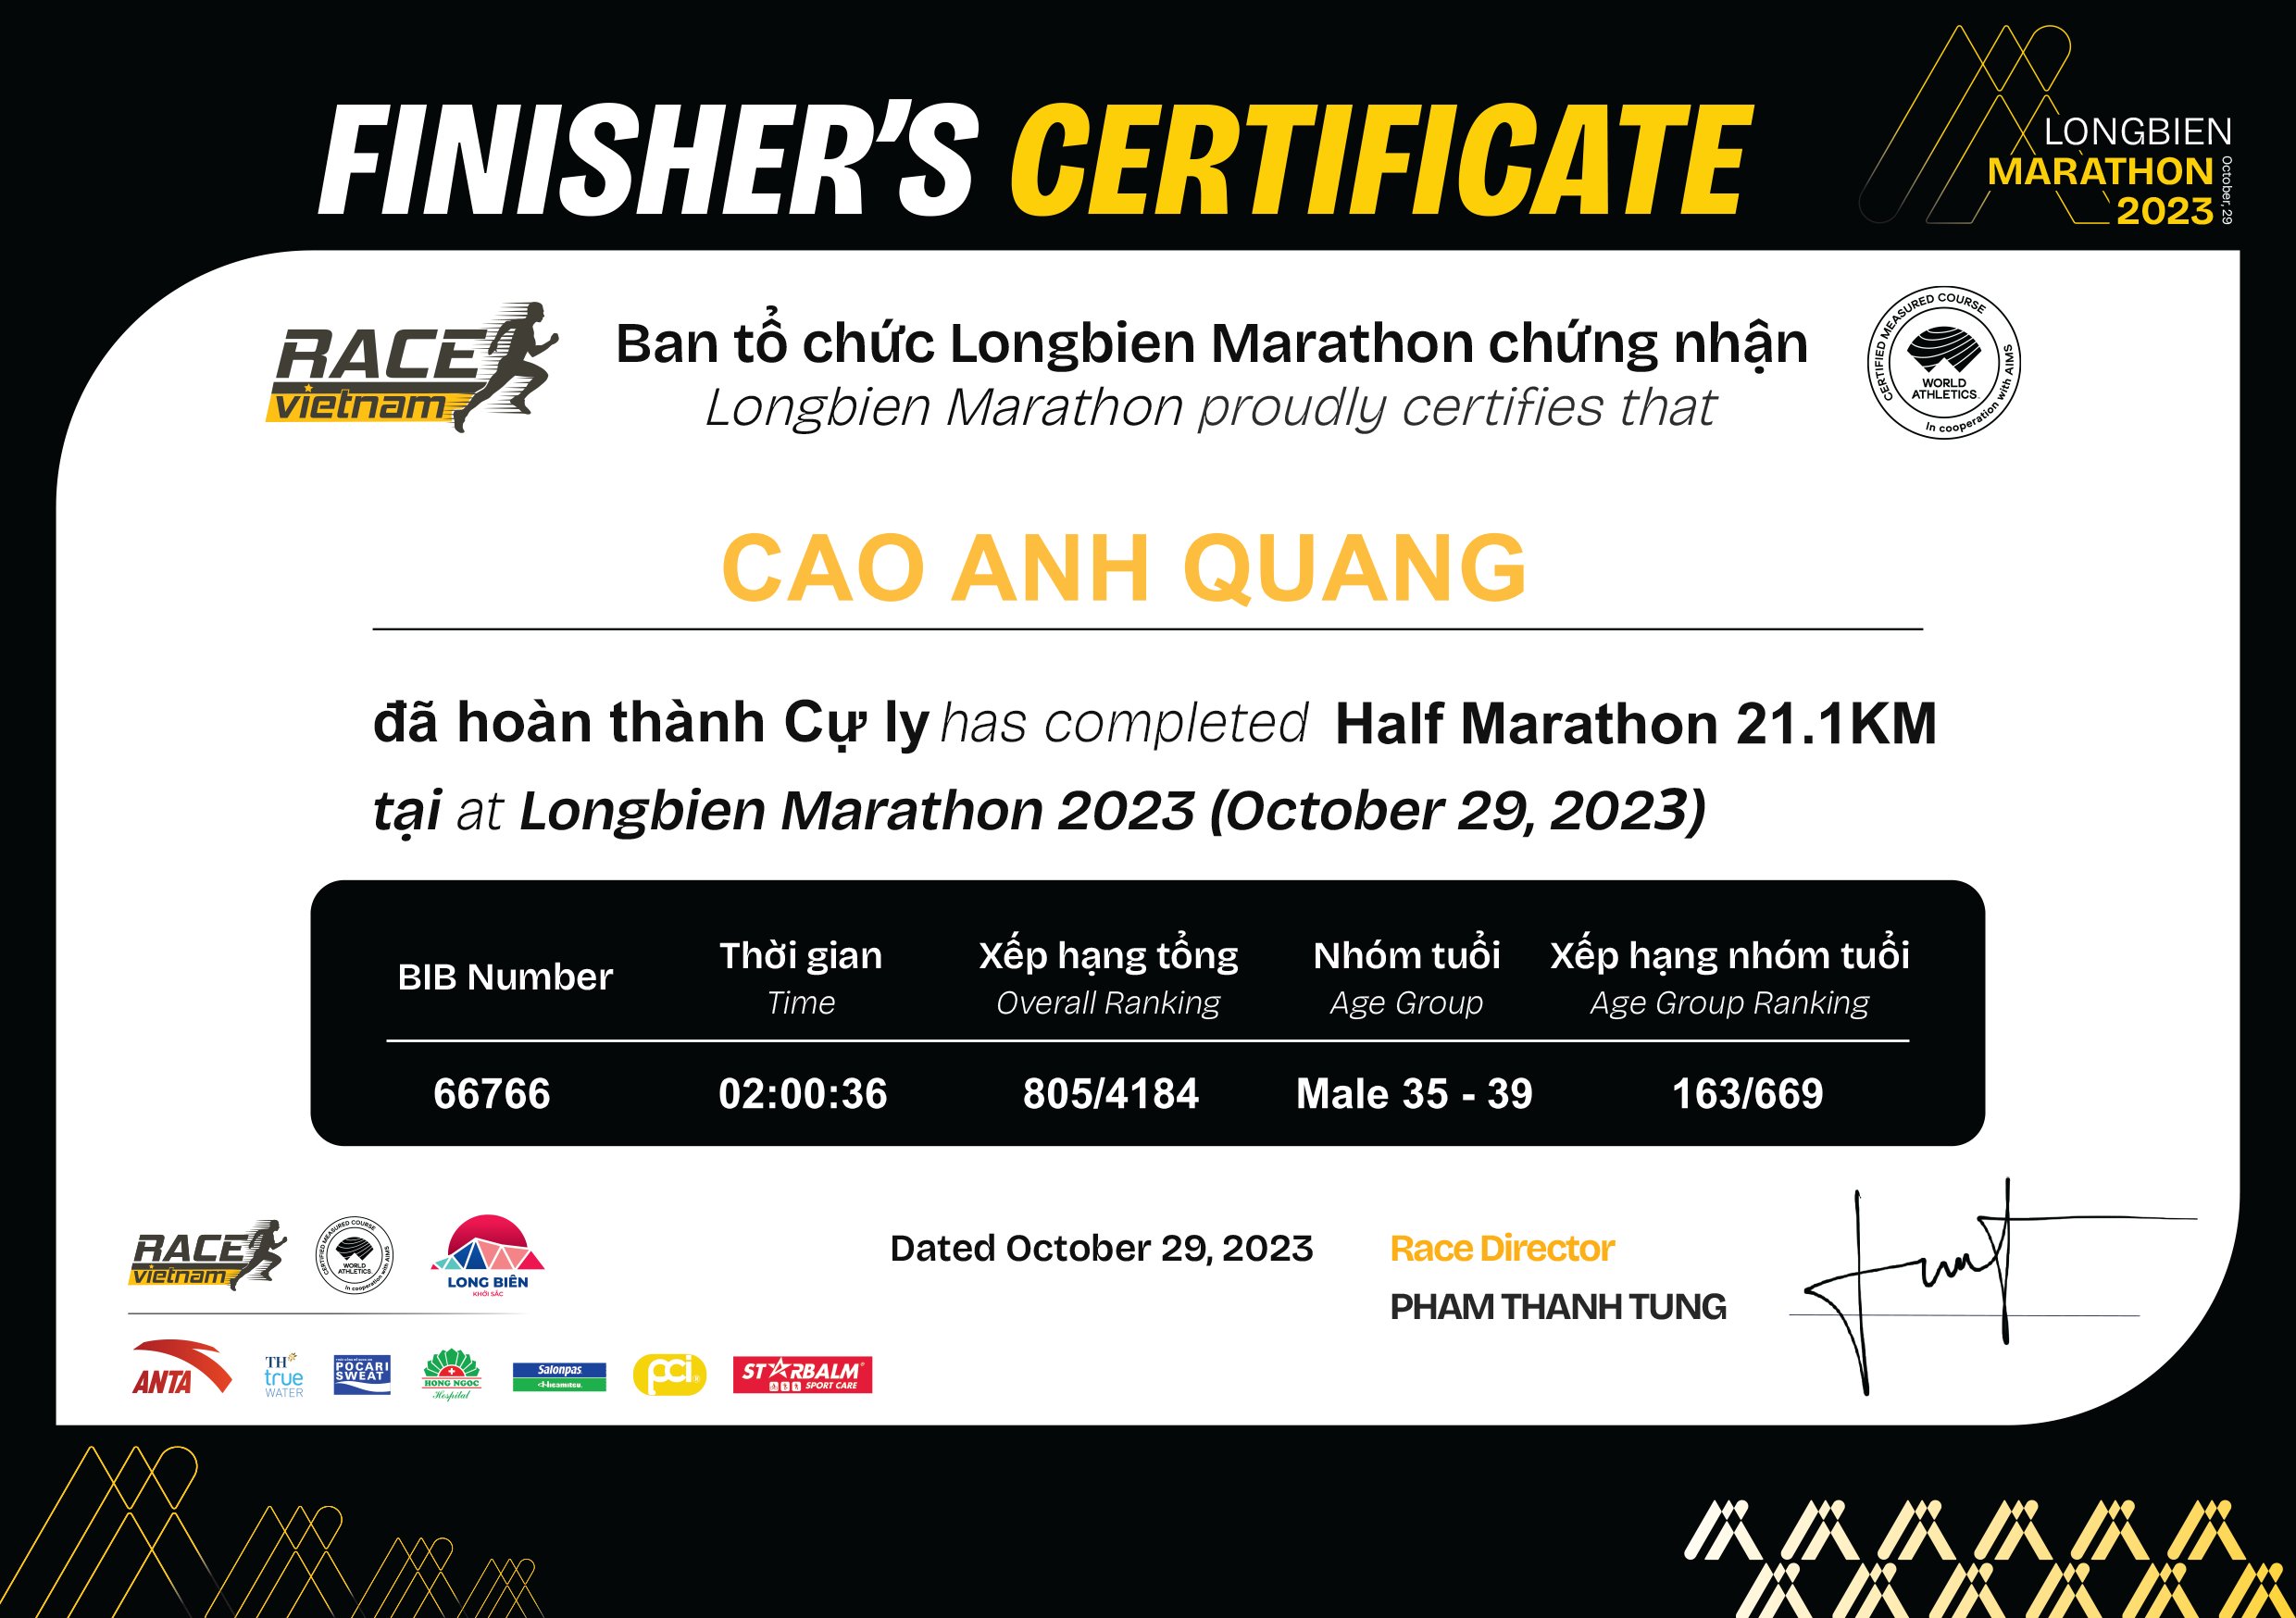 66766 - Cao anh quang